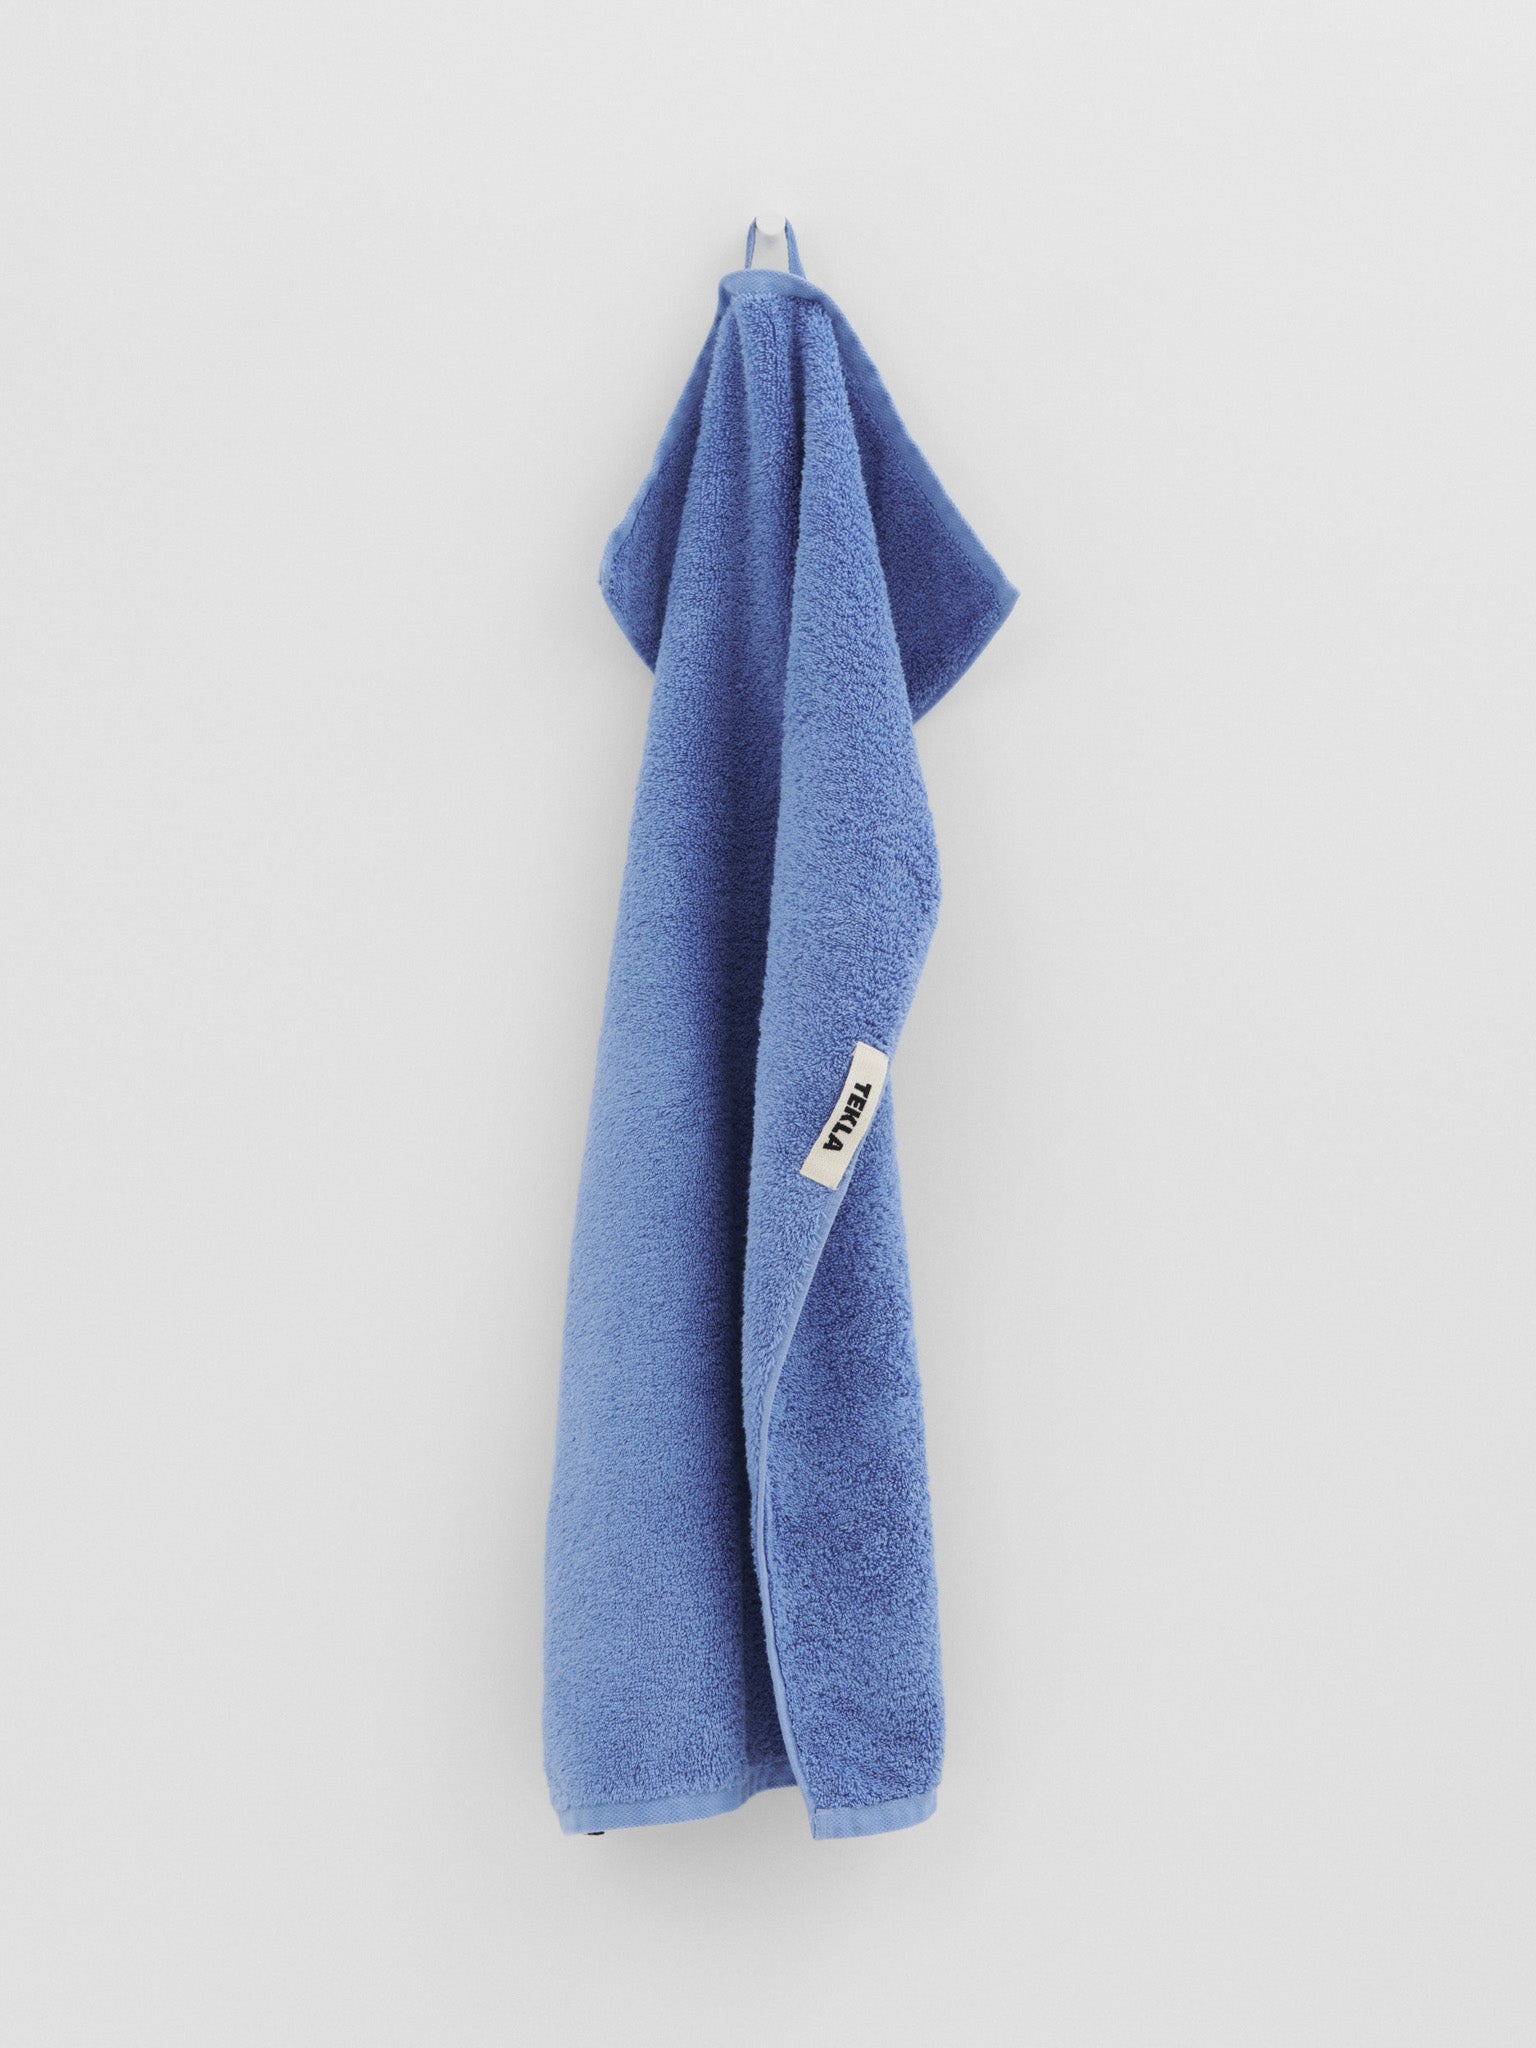 Hand Towel in Clear Blue